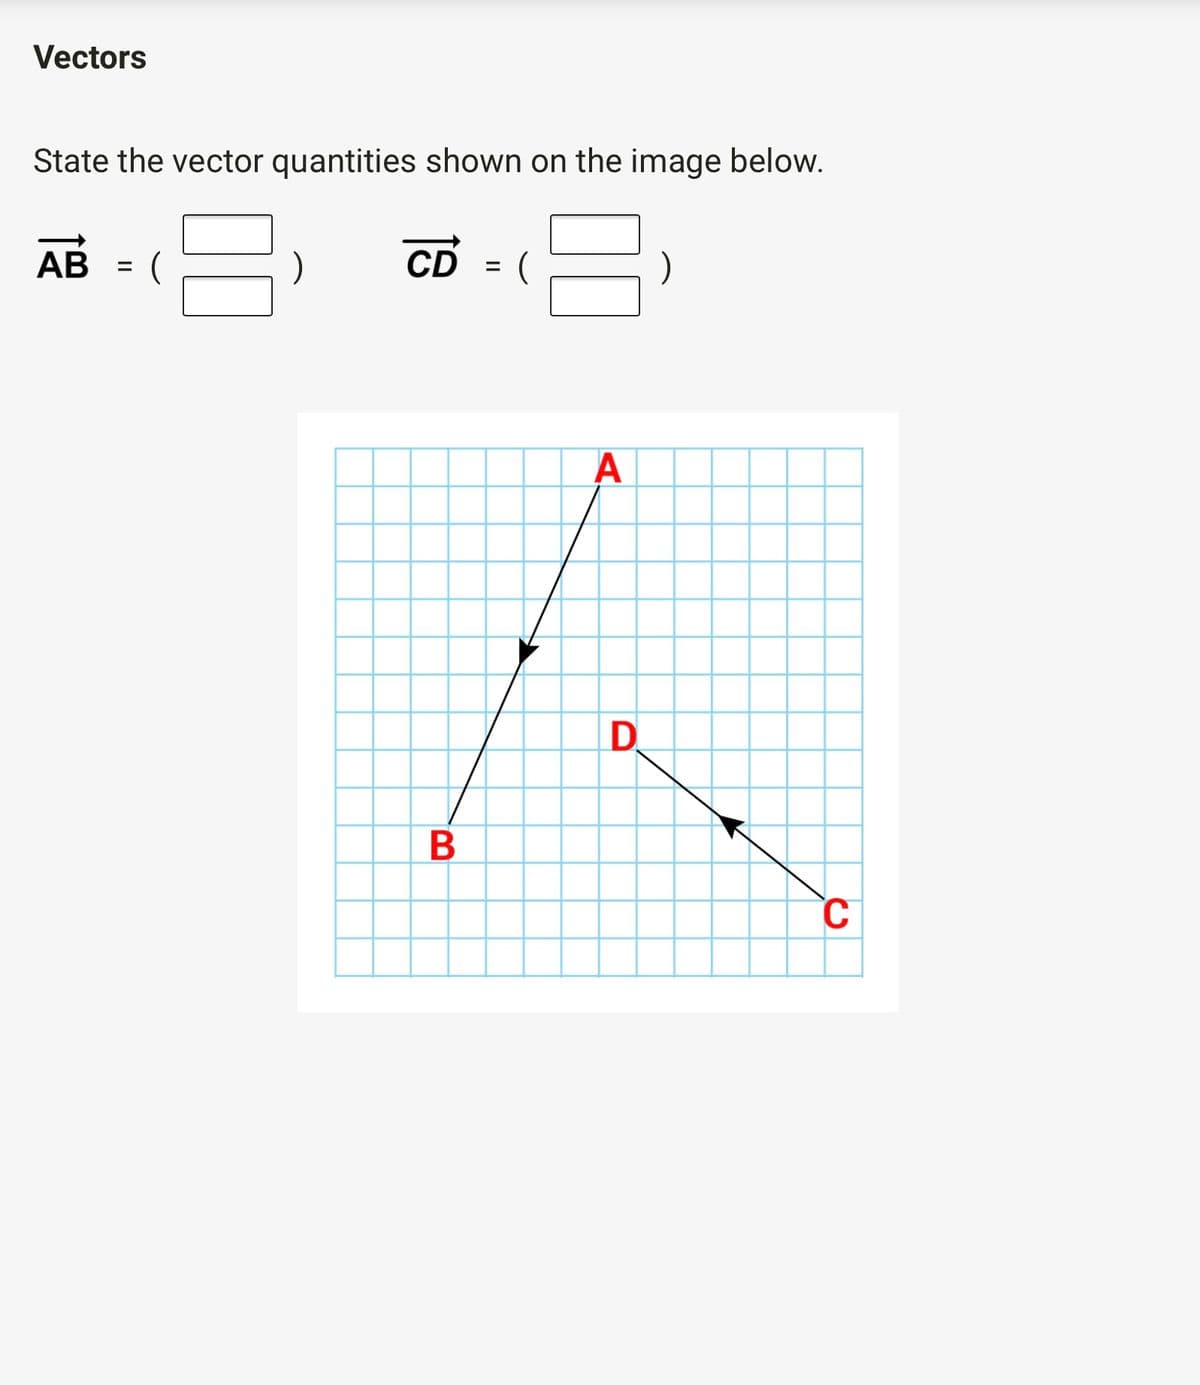 Vectors
State the vector quantities shown on the image below.
CD = (
АВ
A
D.
В
